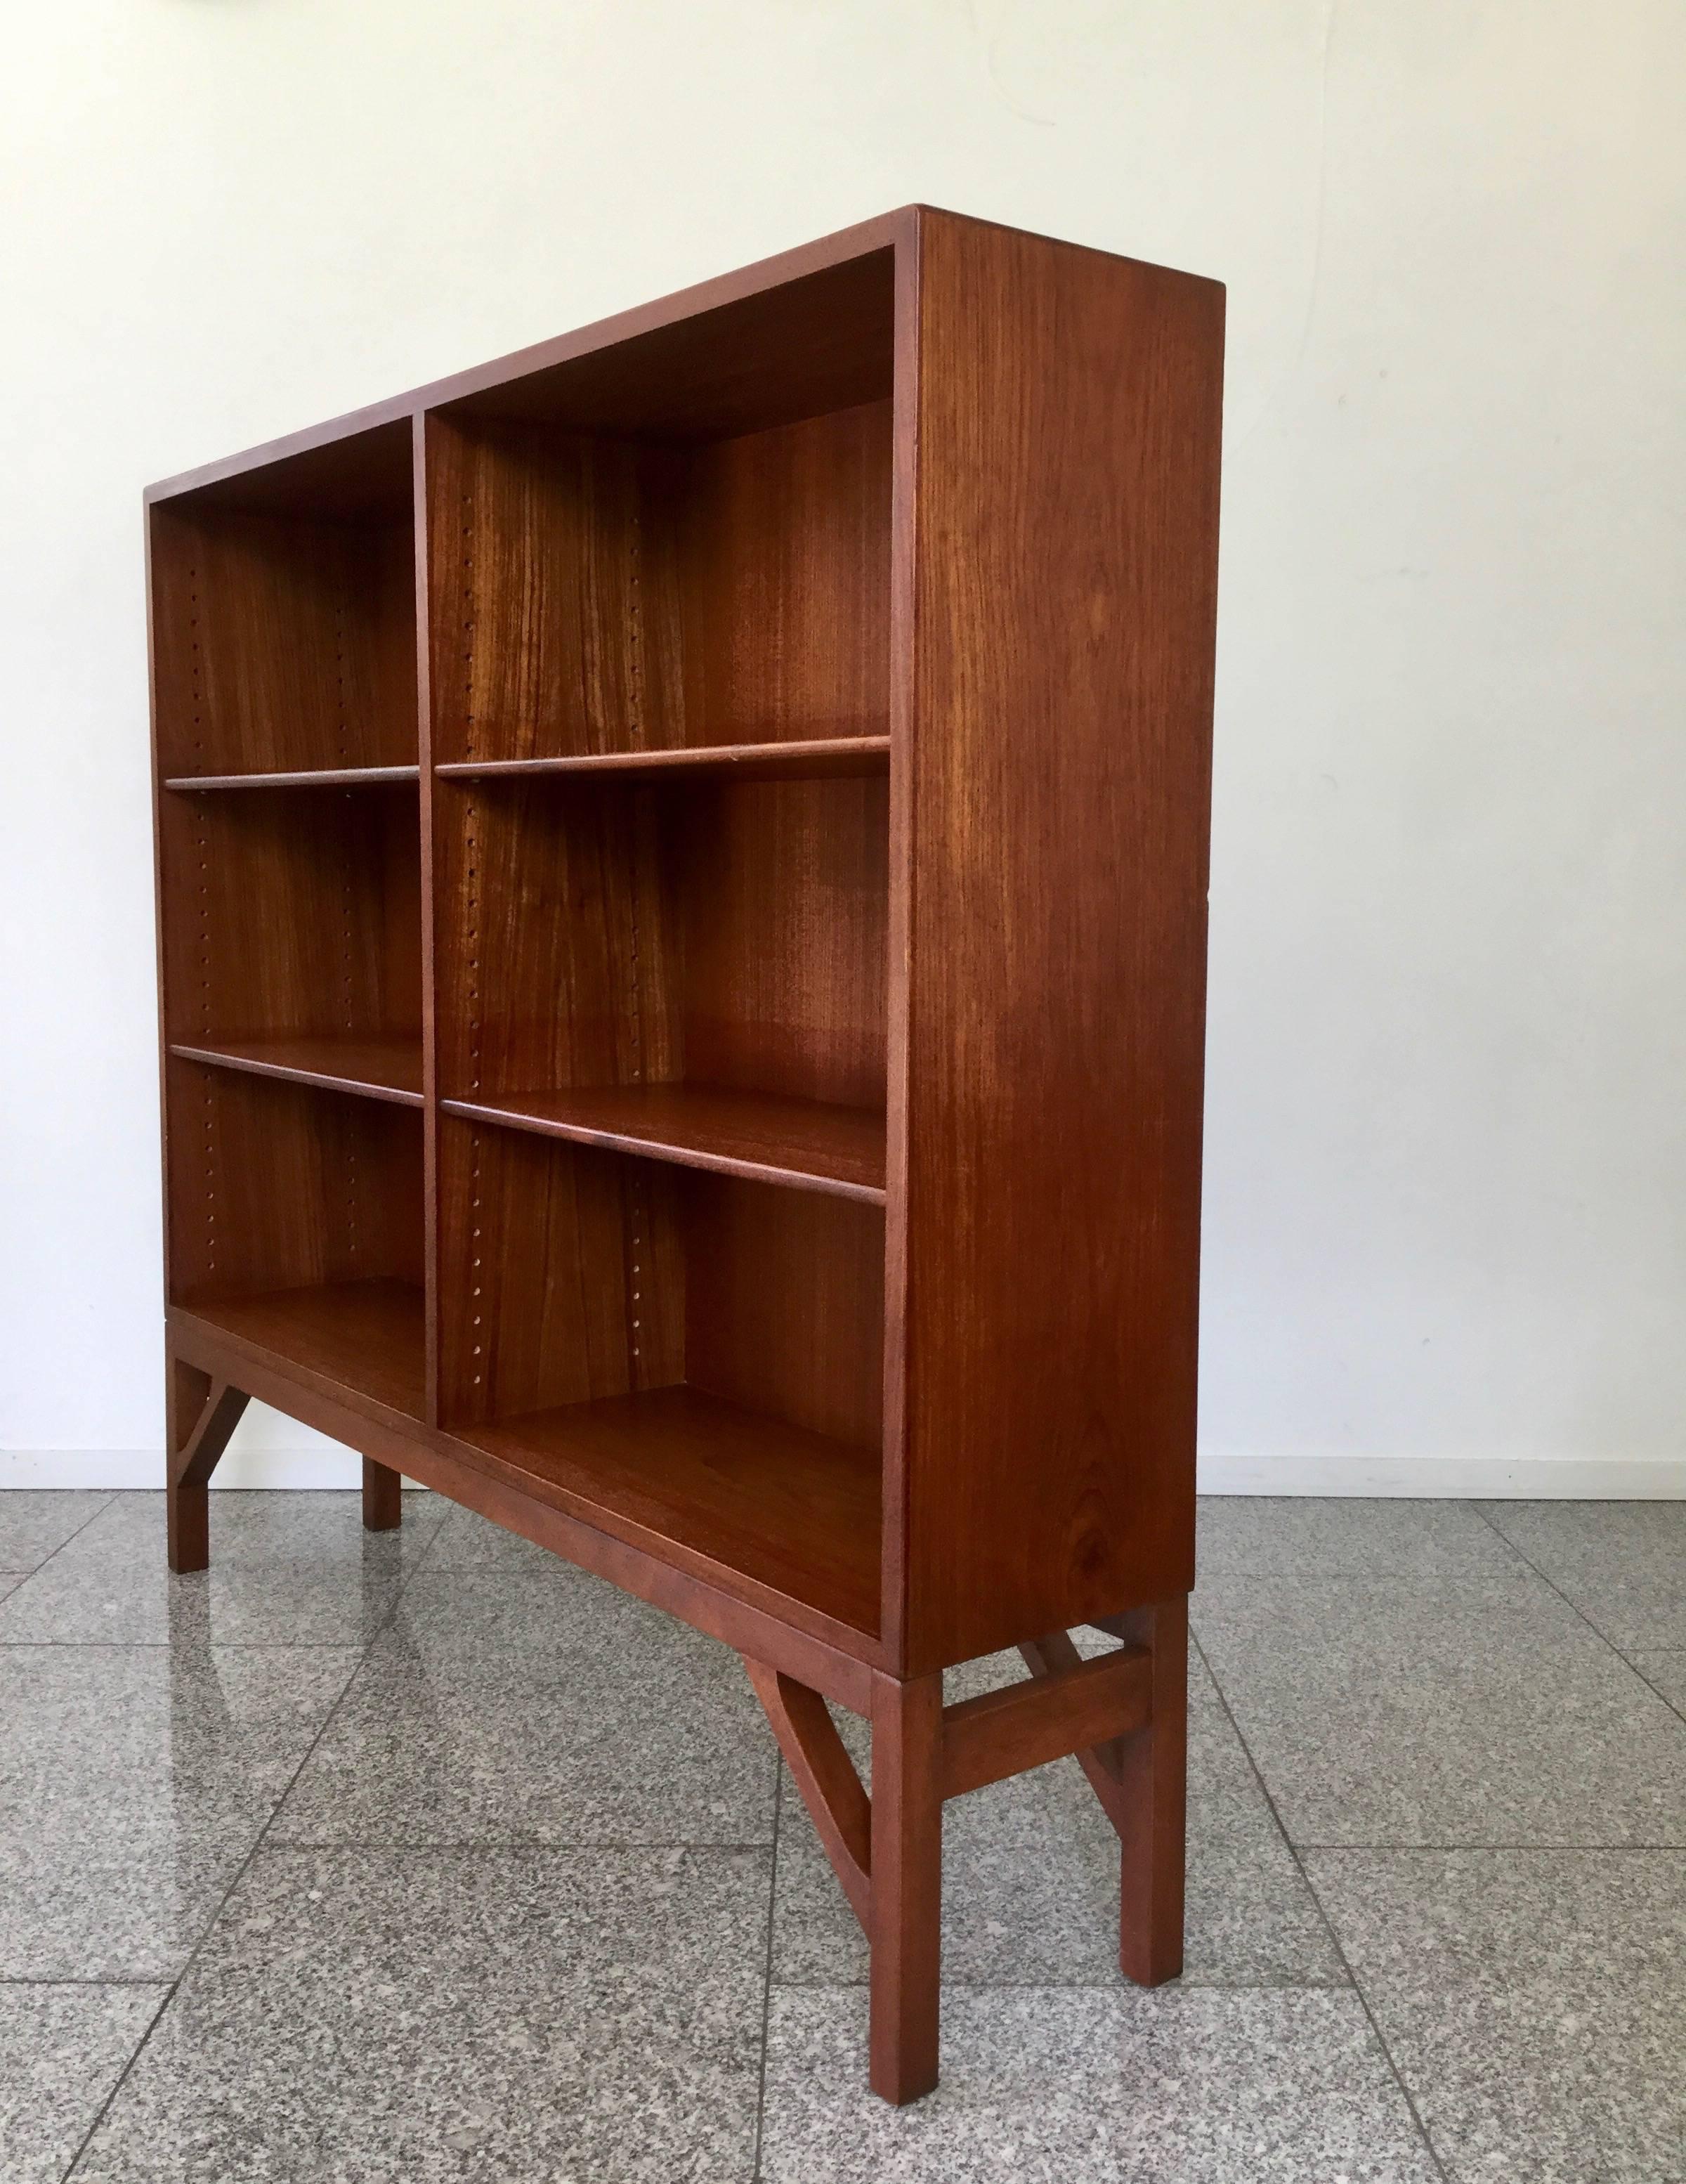 Teak bookcase by Danish designer Børge Mogensen on 'Chinese' base - a signature base by Børge Mogensen - executed by CM Madsen cabinetmakers Denmark for FDB furniture cooperation. The bookcase is divided in two compartments that each contains of two